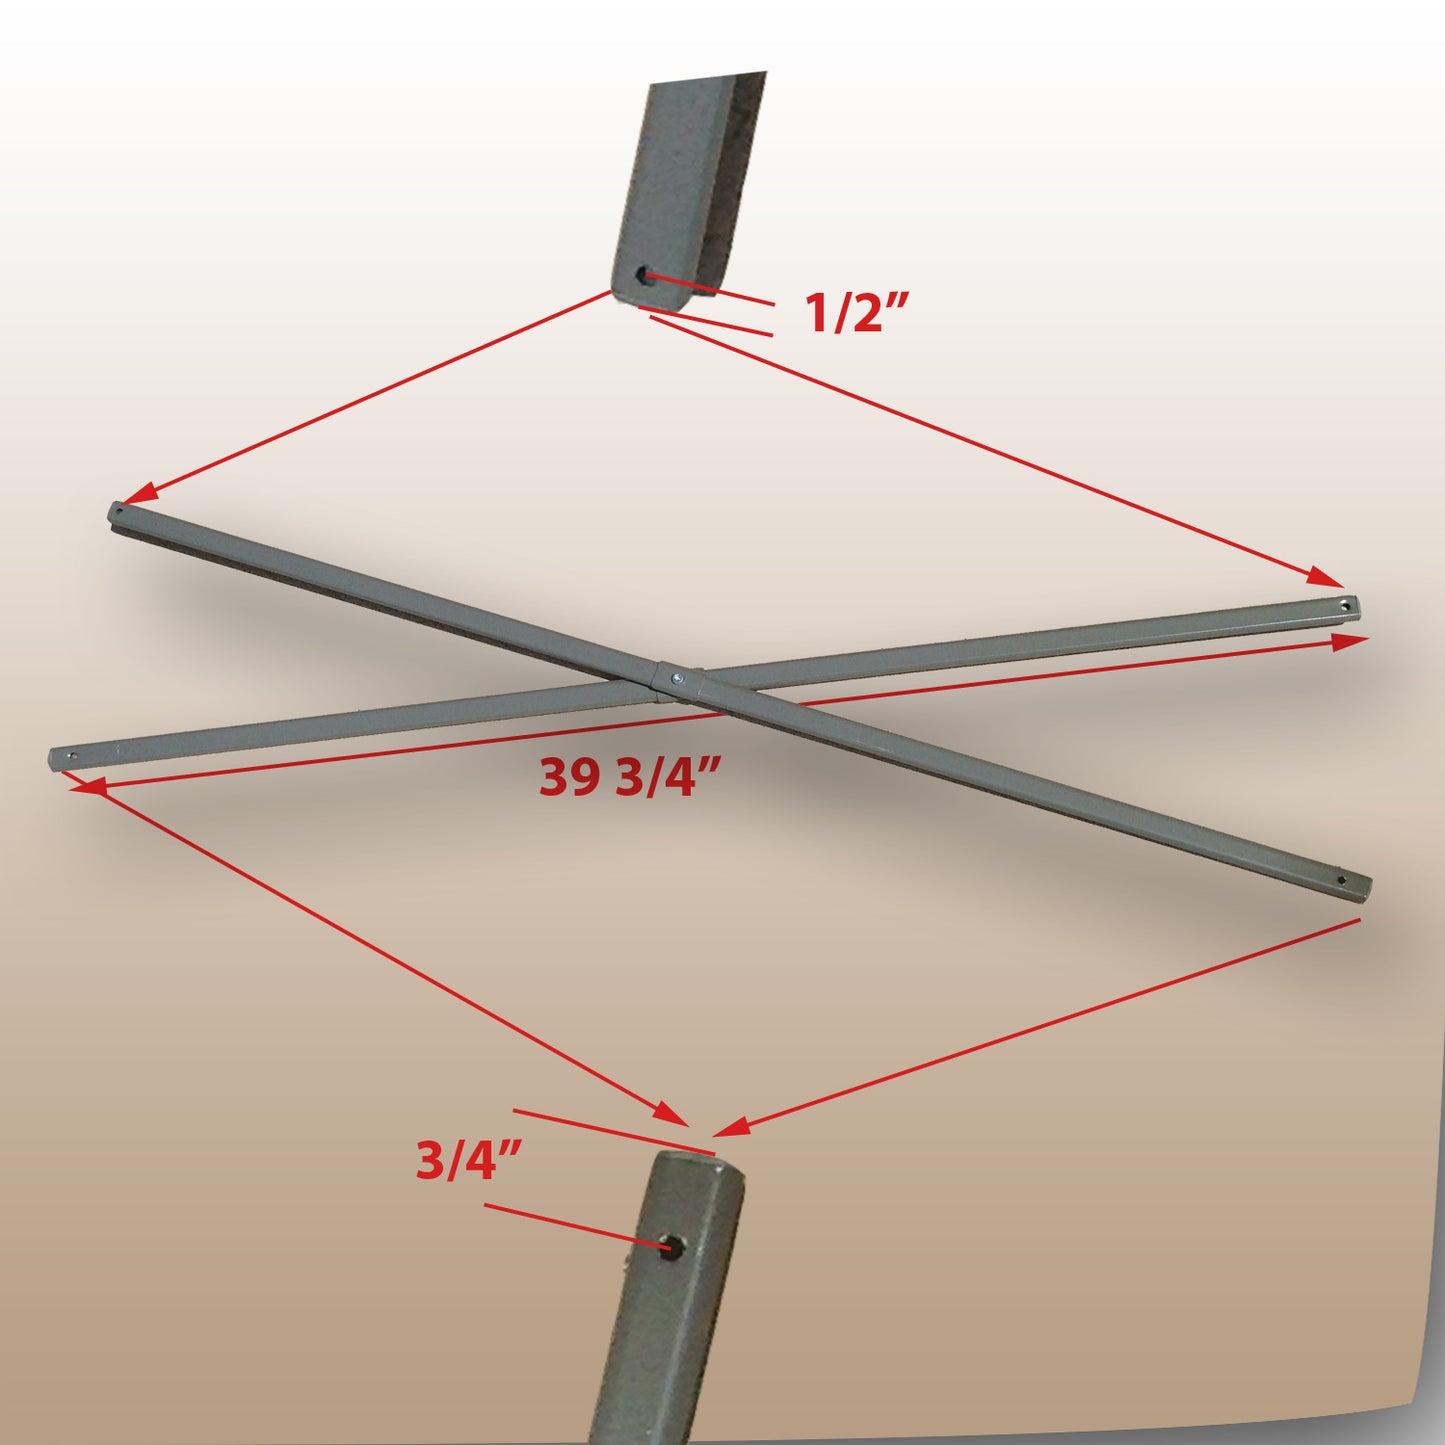 This photo showcases a pair of gray canopy replacement parts, specifically two cross bars, each measuring 39 3/4 inches in length, 3/4 inch in width, and 3/8 inches in thickness.